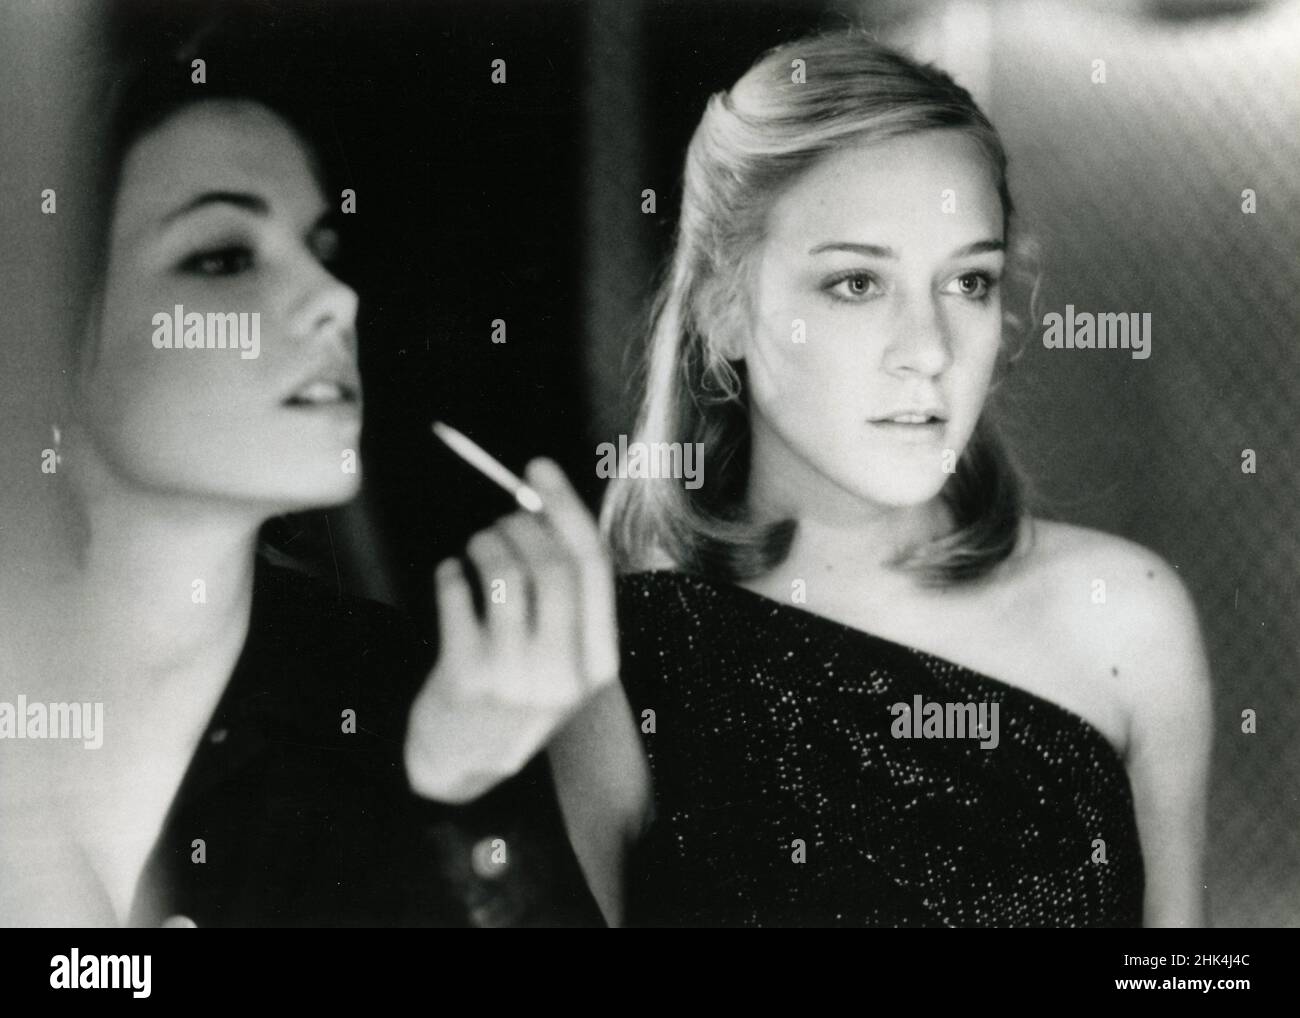 Actresses Kate Beckinsale and Chloe Sevigny in the movie Last Days of Disco, USA 1998 Stock Photo